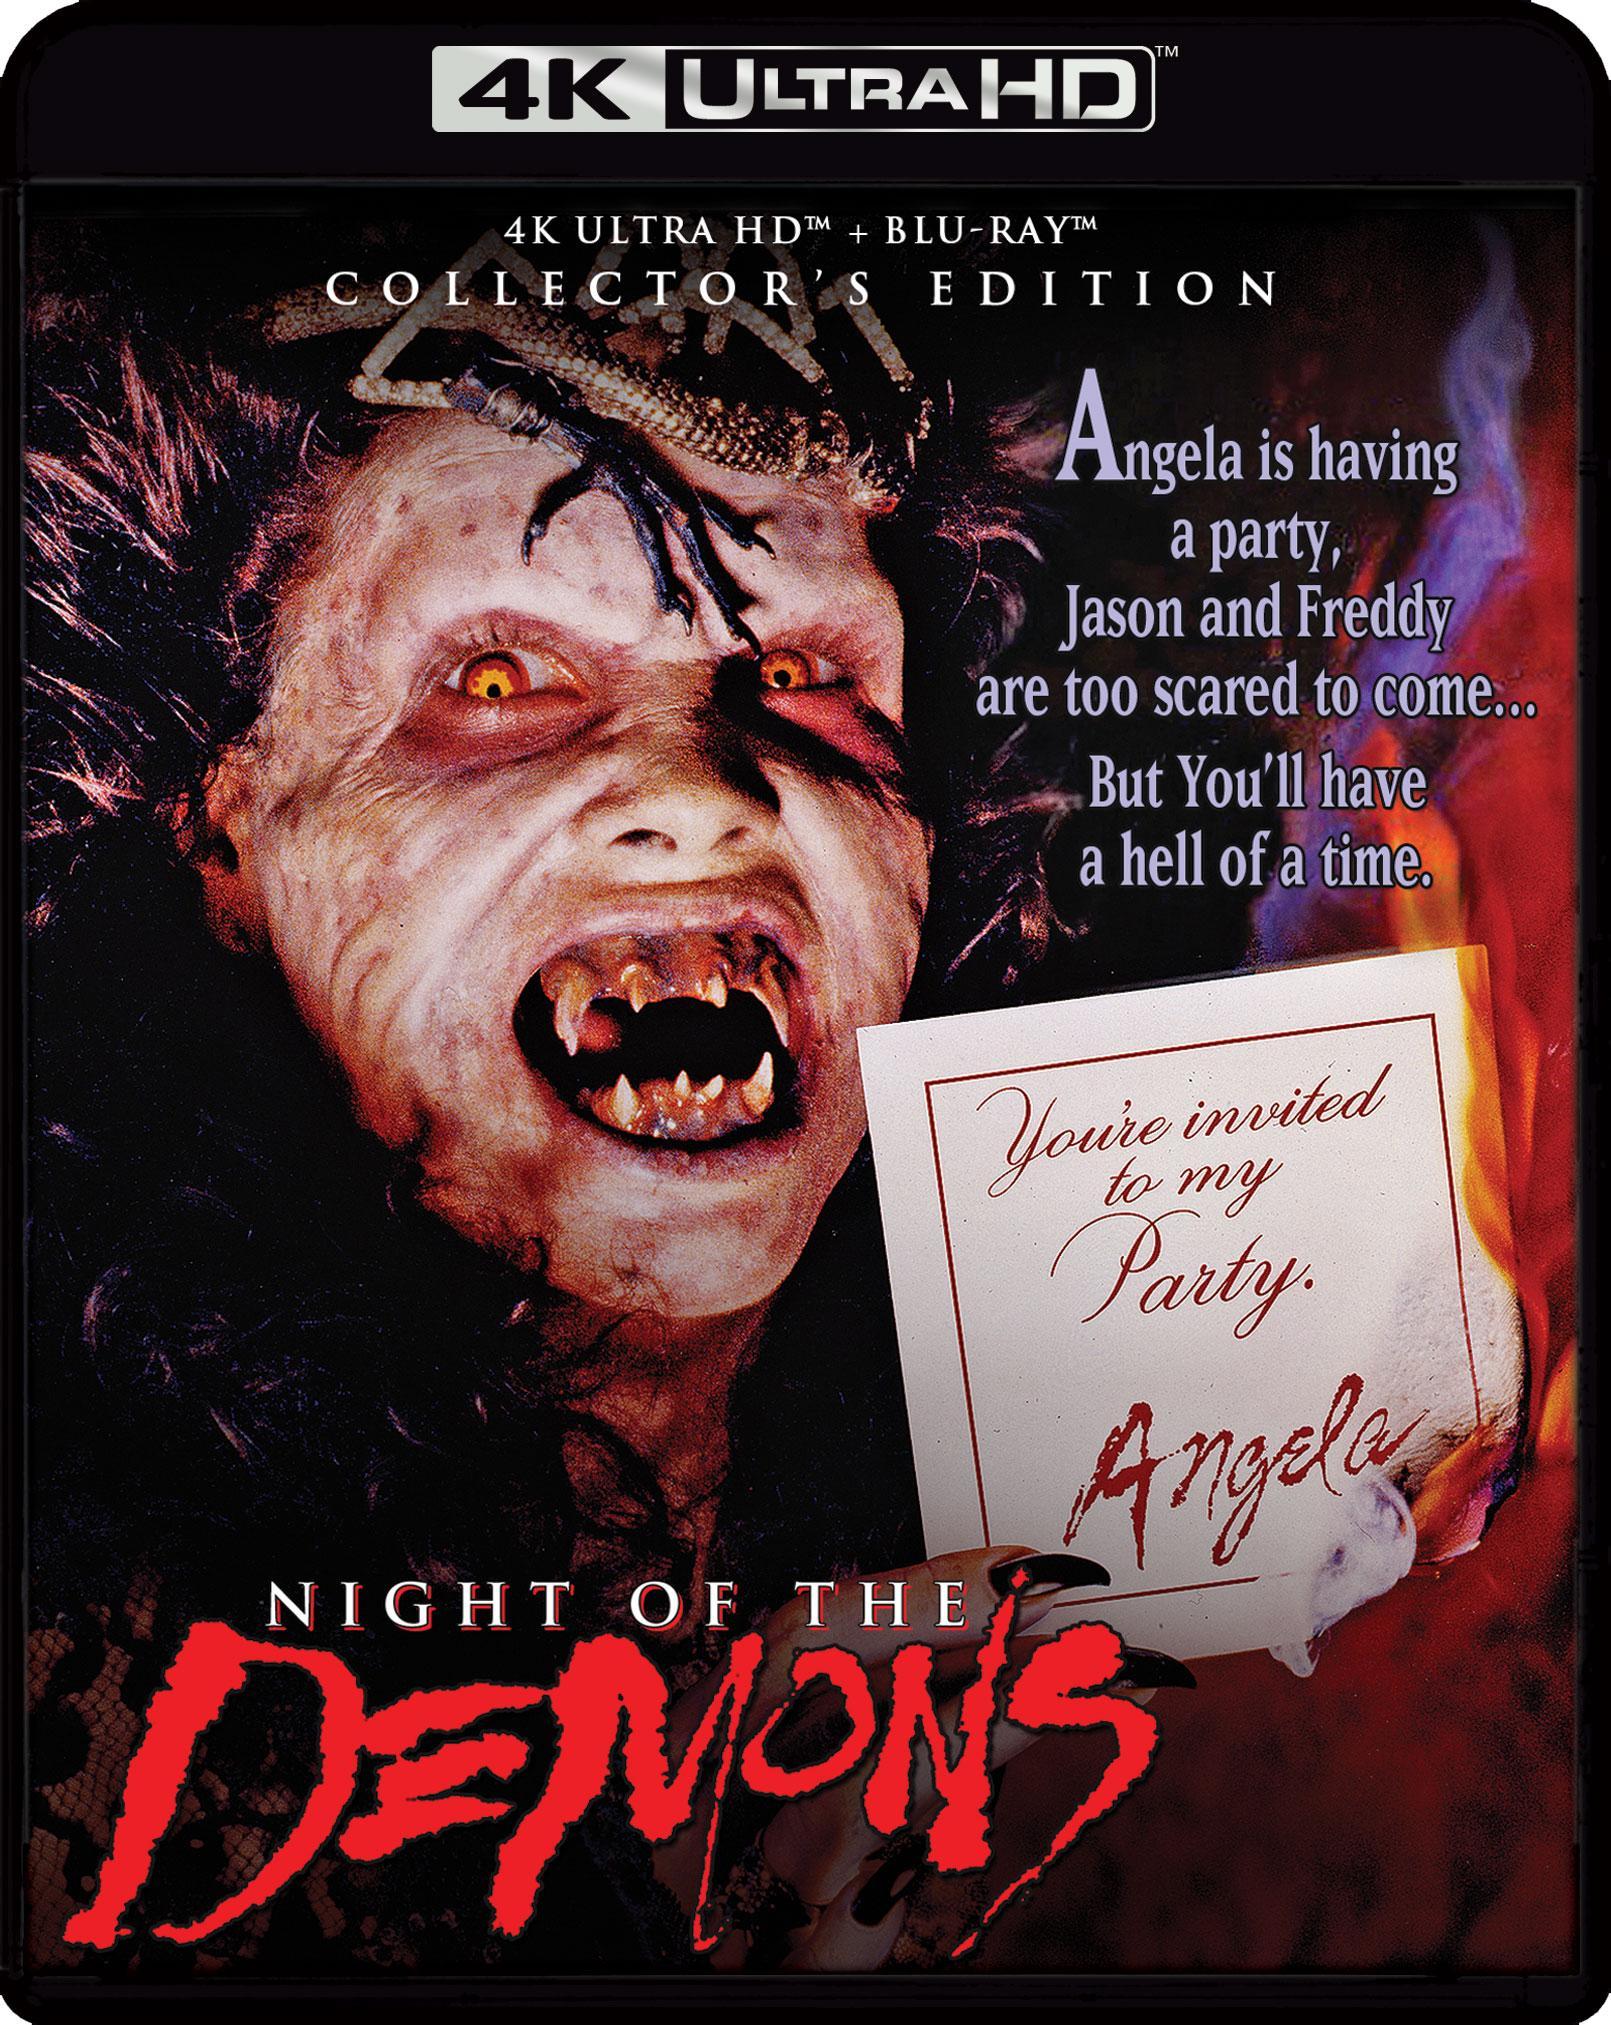 Night of the Demons (1988) (Collector's Edition) (4K Ultra HD + Blu-ray) - image 1 of 3